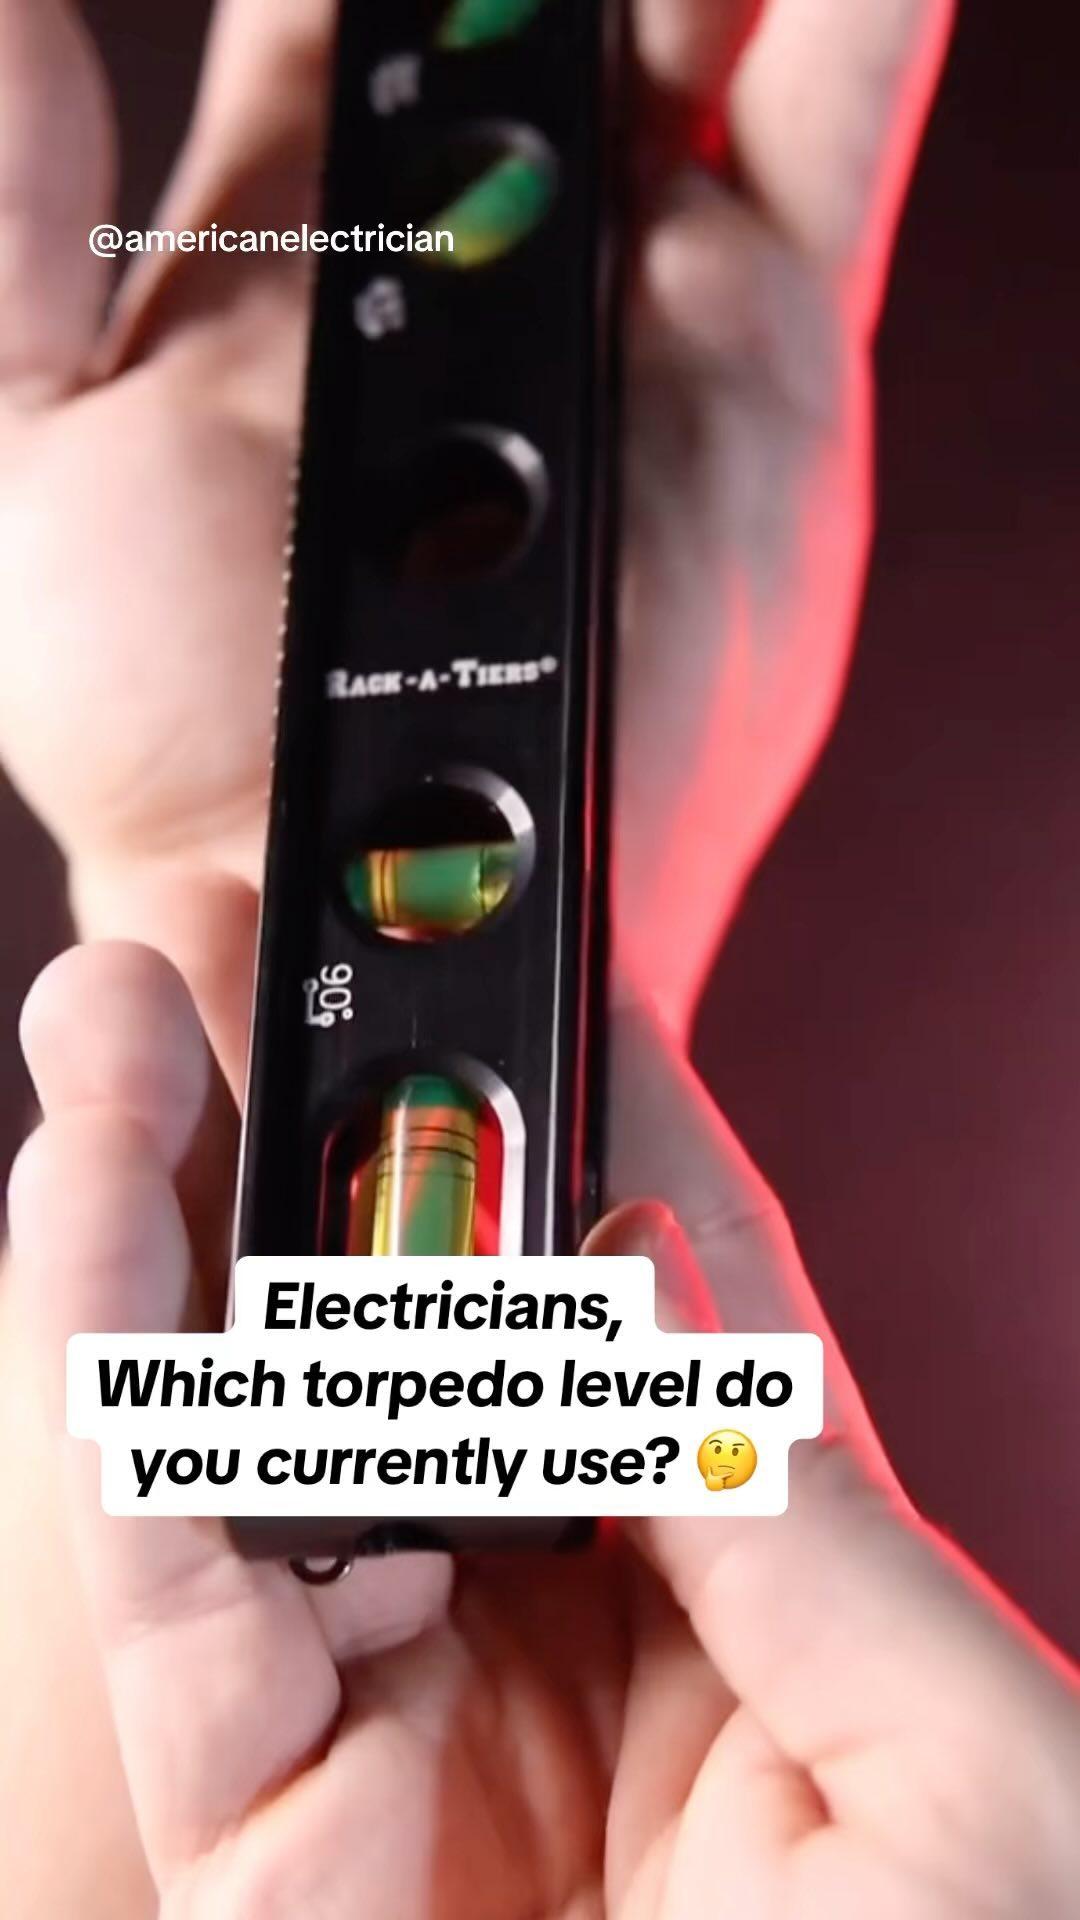 Who makes the best one? 🤔Did you know about the Rack-A-Tiers Jet Level? Find it in the link in our bio. Thanks @American Electrician for showing it off 🤙
-
#rackatiers #rackatierstools #sparky #electricians #tradie #bluecollar #electricalwork #bluecollarlife #sparkylife #tooltok #electriciantools #electricianlife